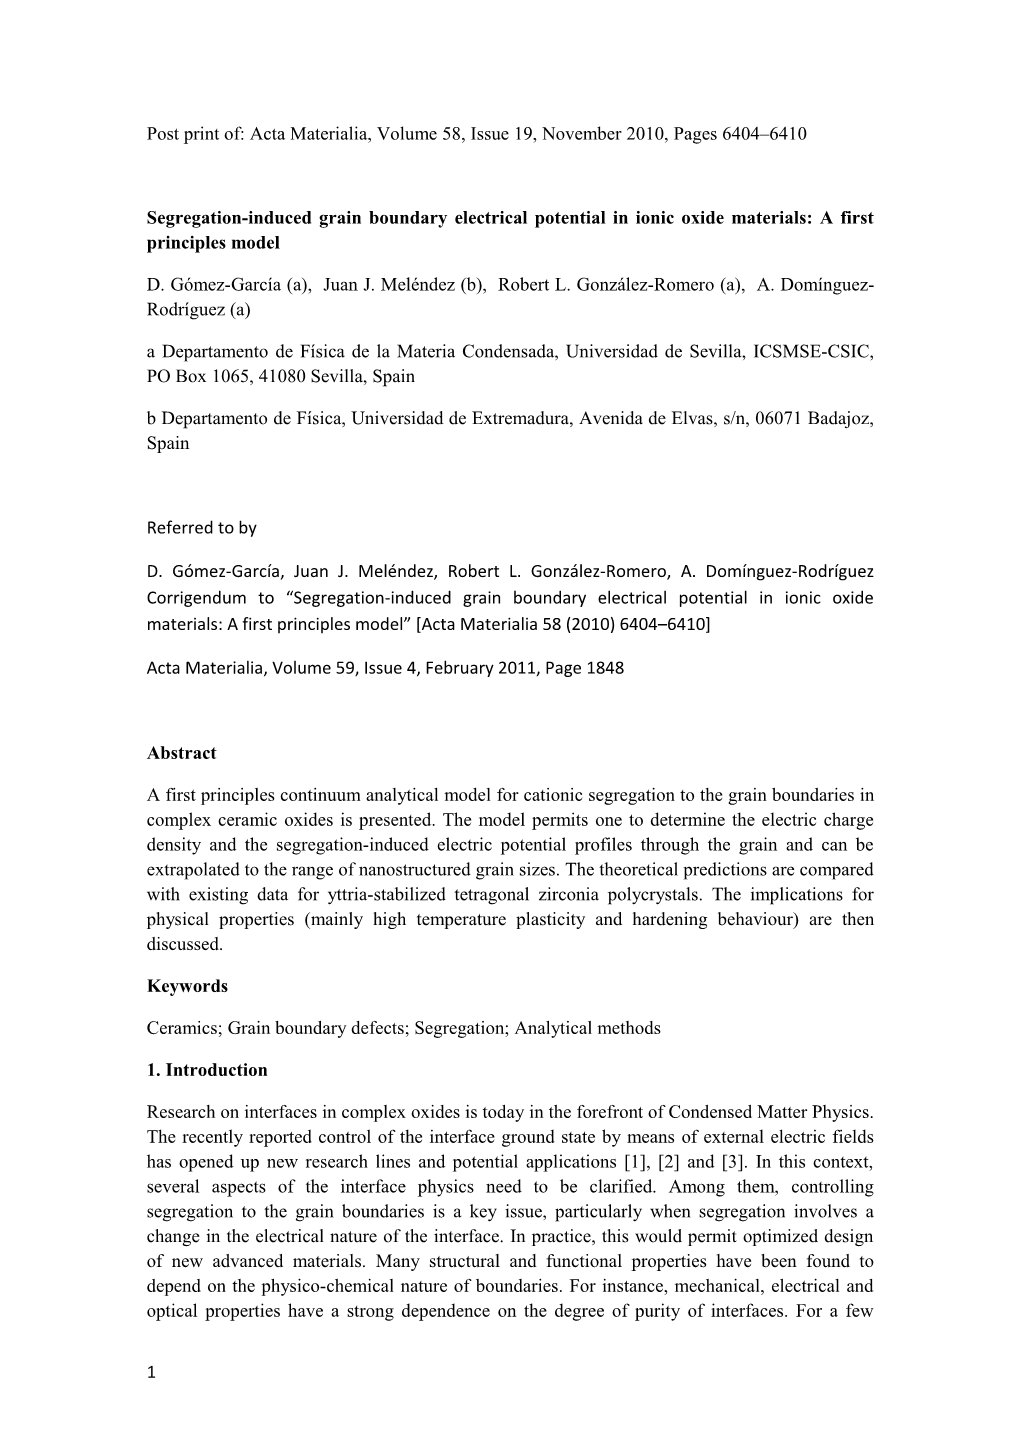 Post Print Of: Actamaterialia, Volume 58, Issue 19, November 2010, Pages 6404 6410